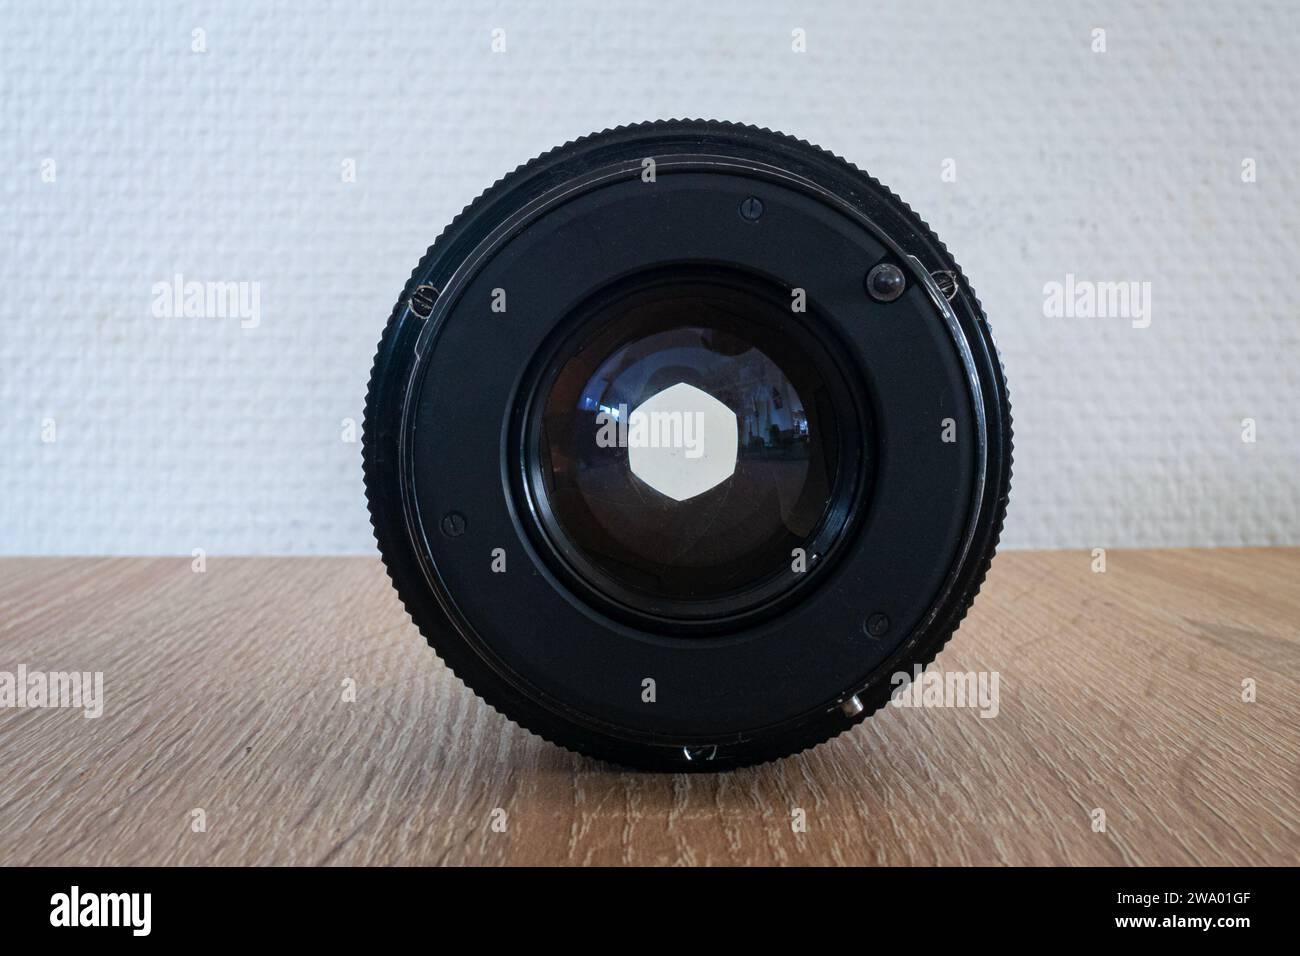 Aperture opening of a photographic lens on a table. Stock Photo